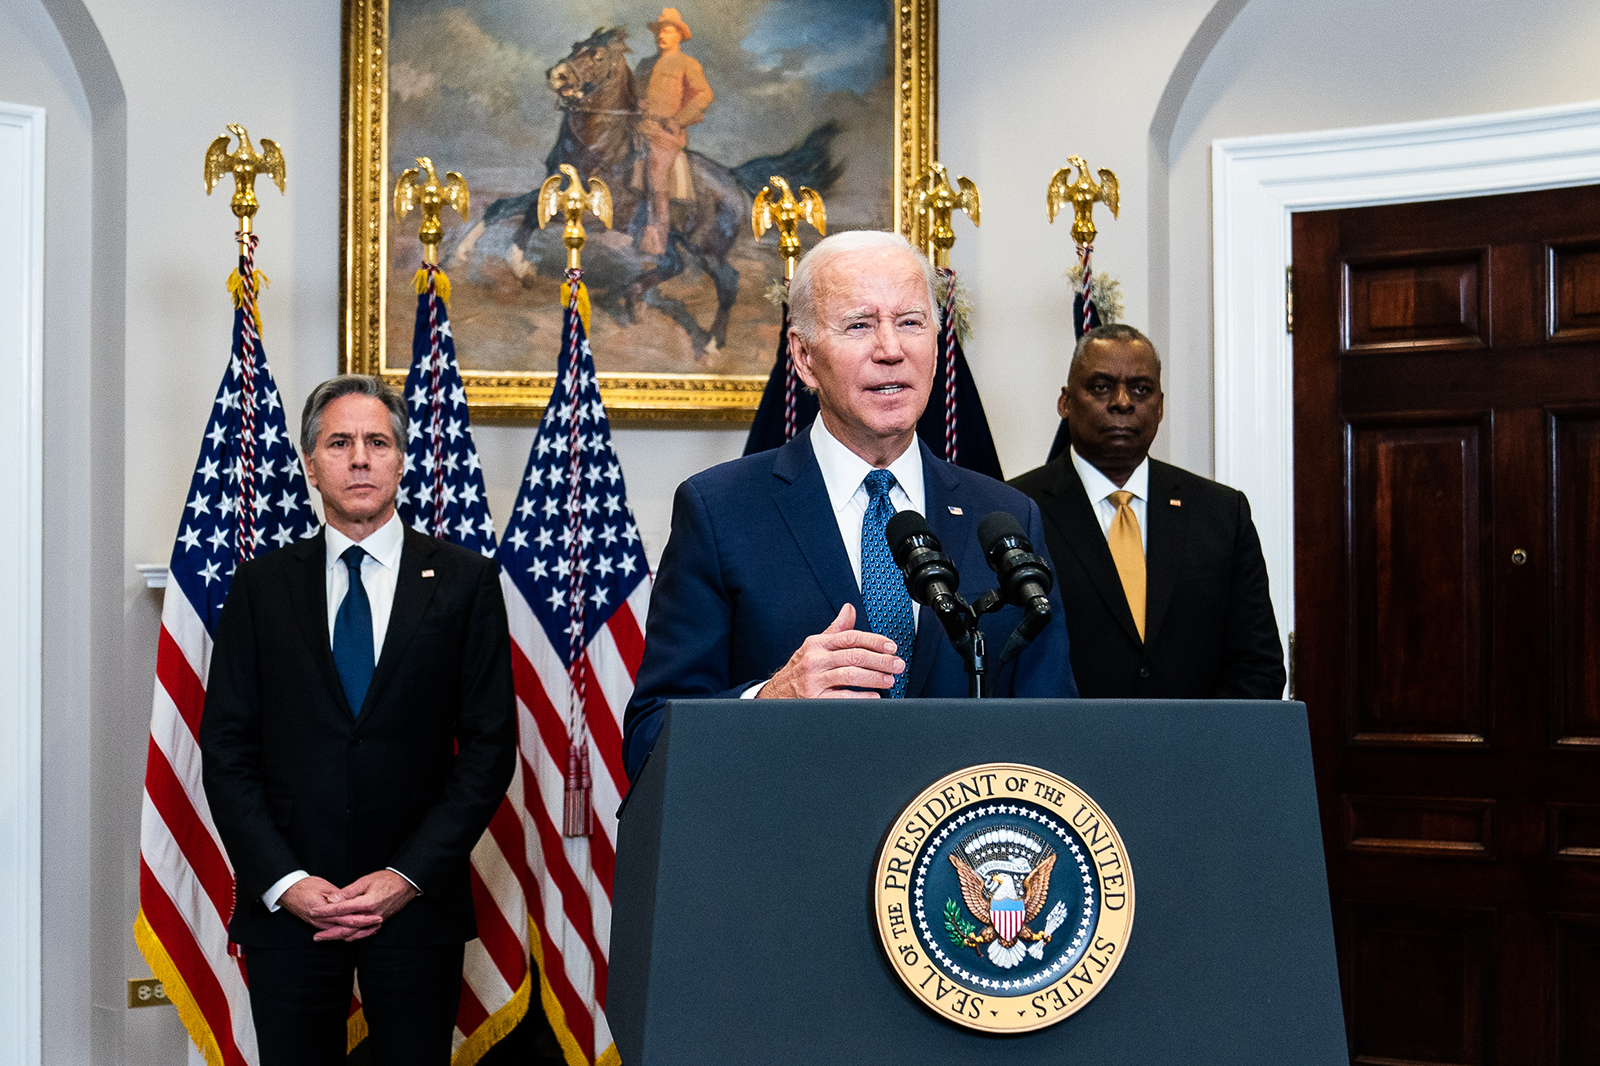 Joe Biden delivers remarks on the continued support for Ukraine in the Roosevelt Room of the White House in Washington on January 25.